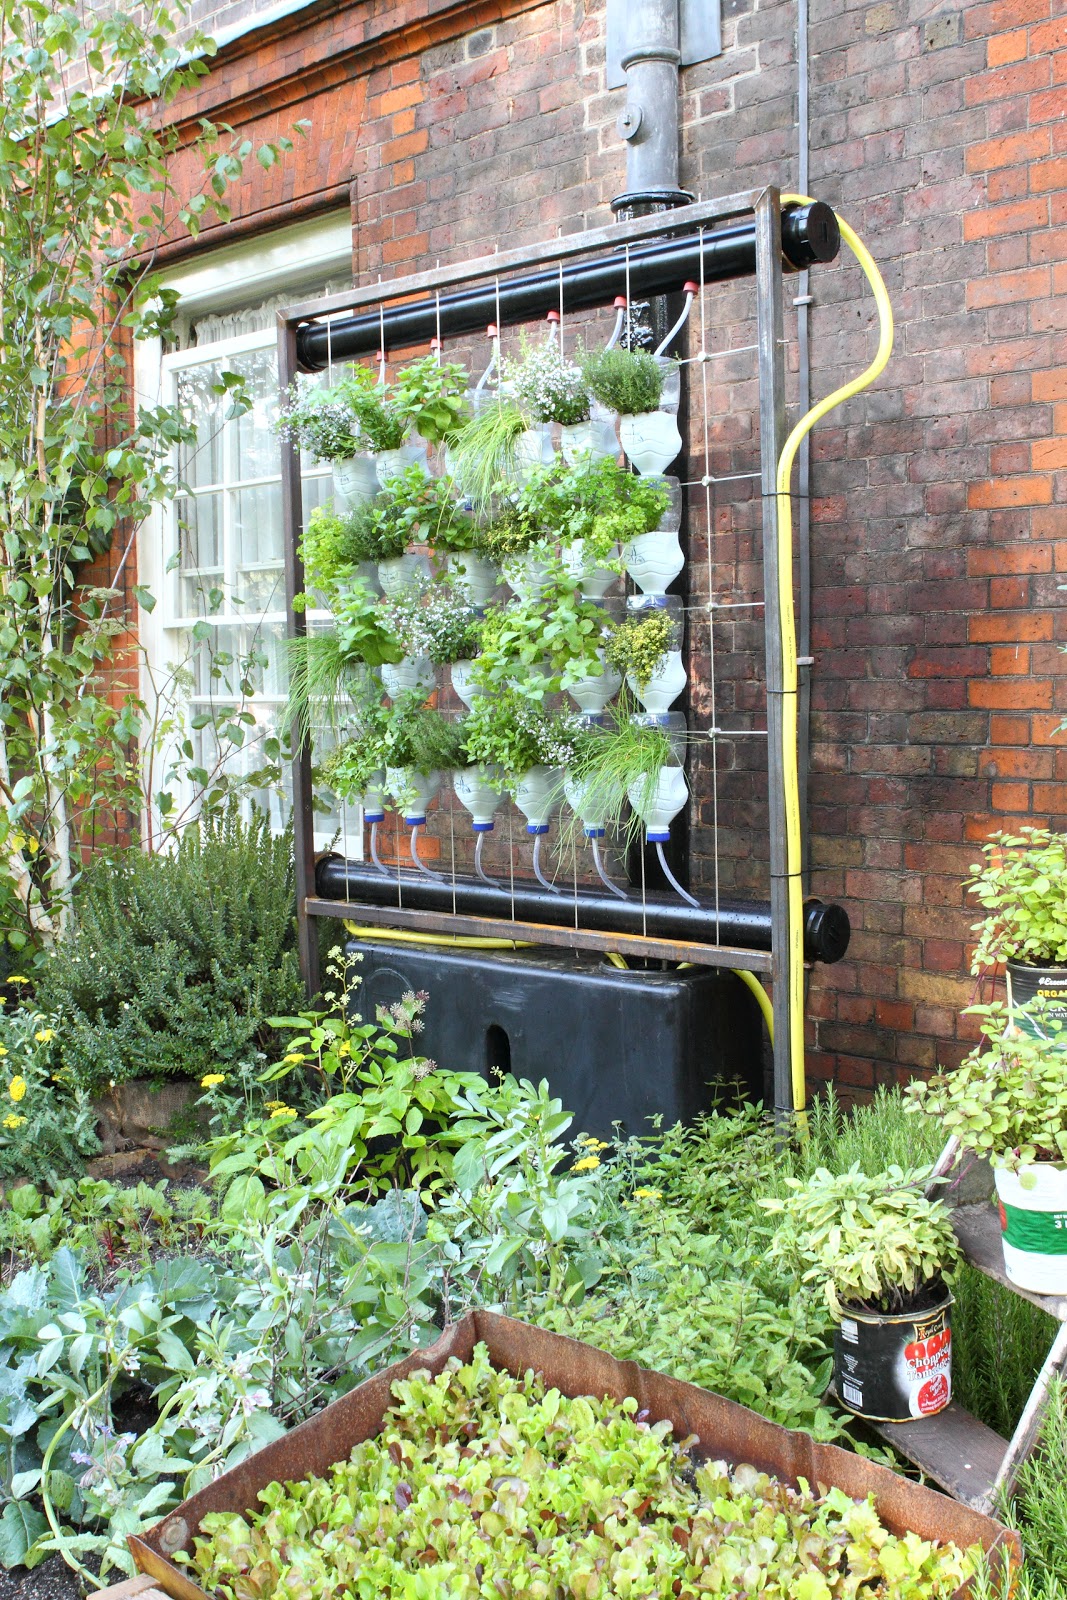 Deb's Dust Bunny: Prince Charles' Sustainable Garden Party